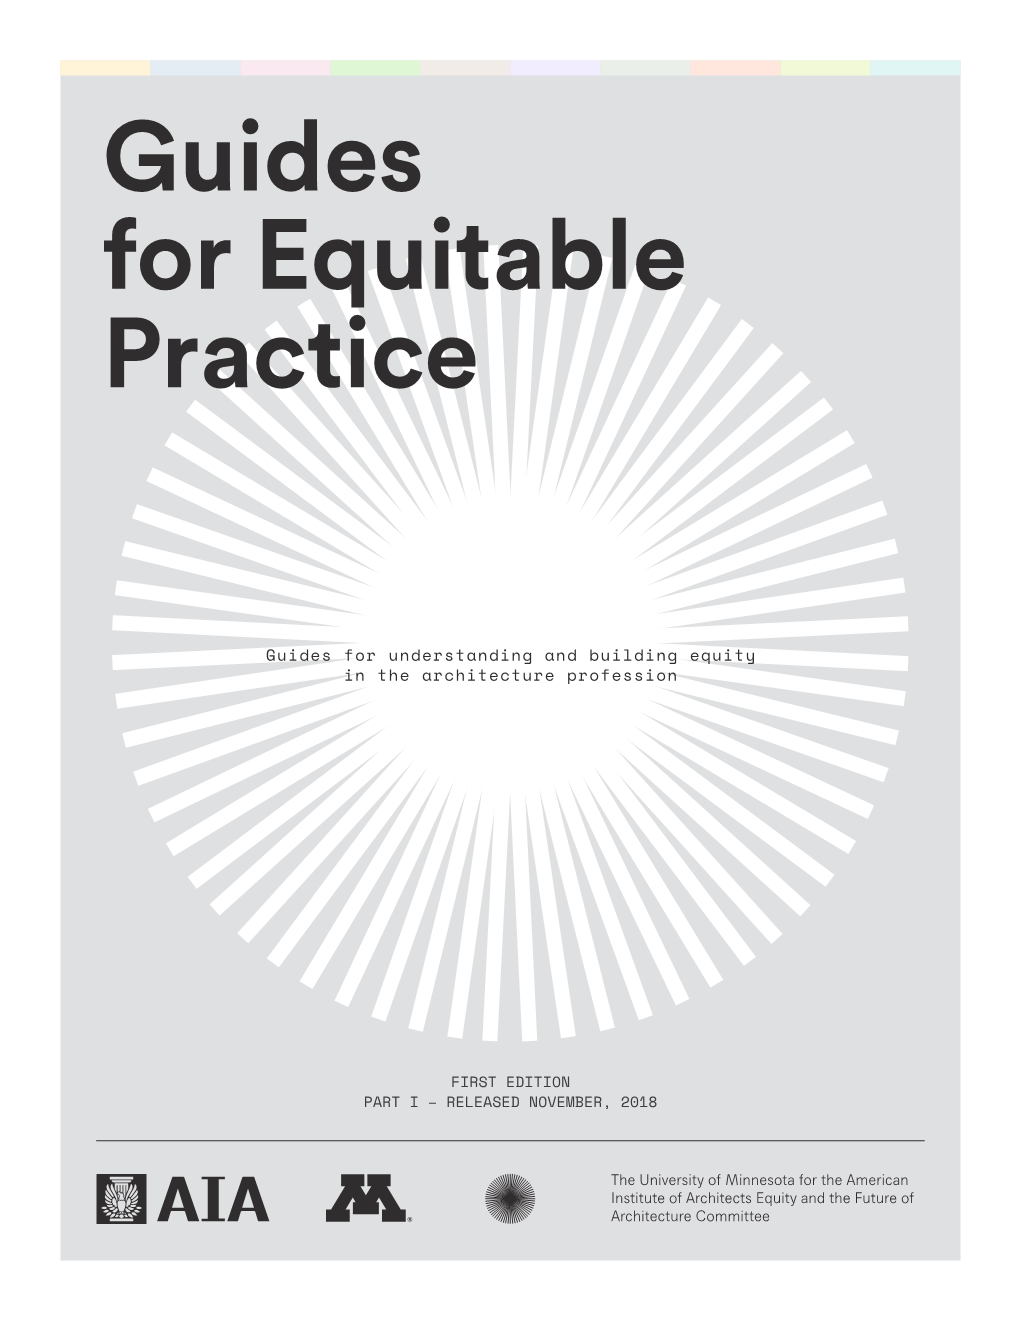 Guides for Equitable Practice